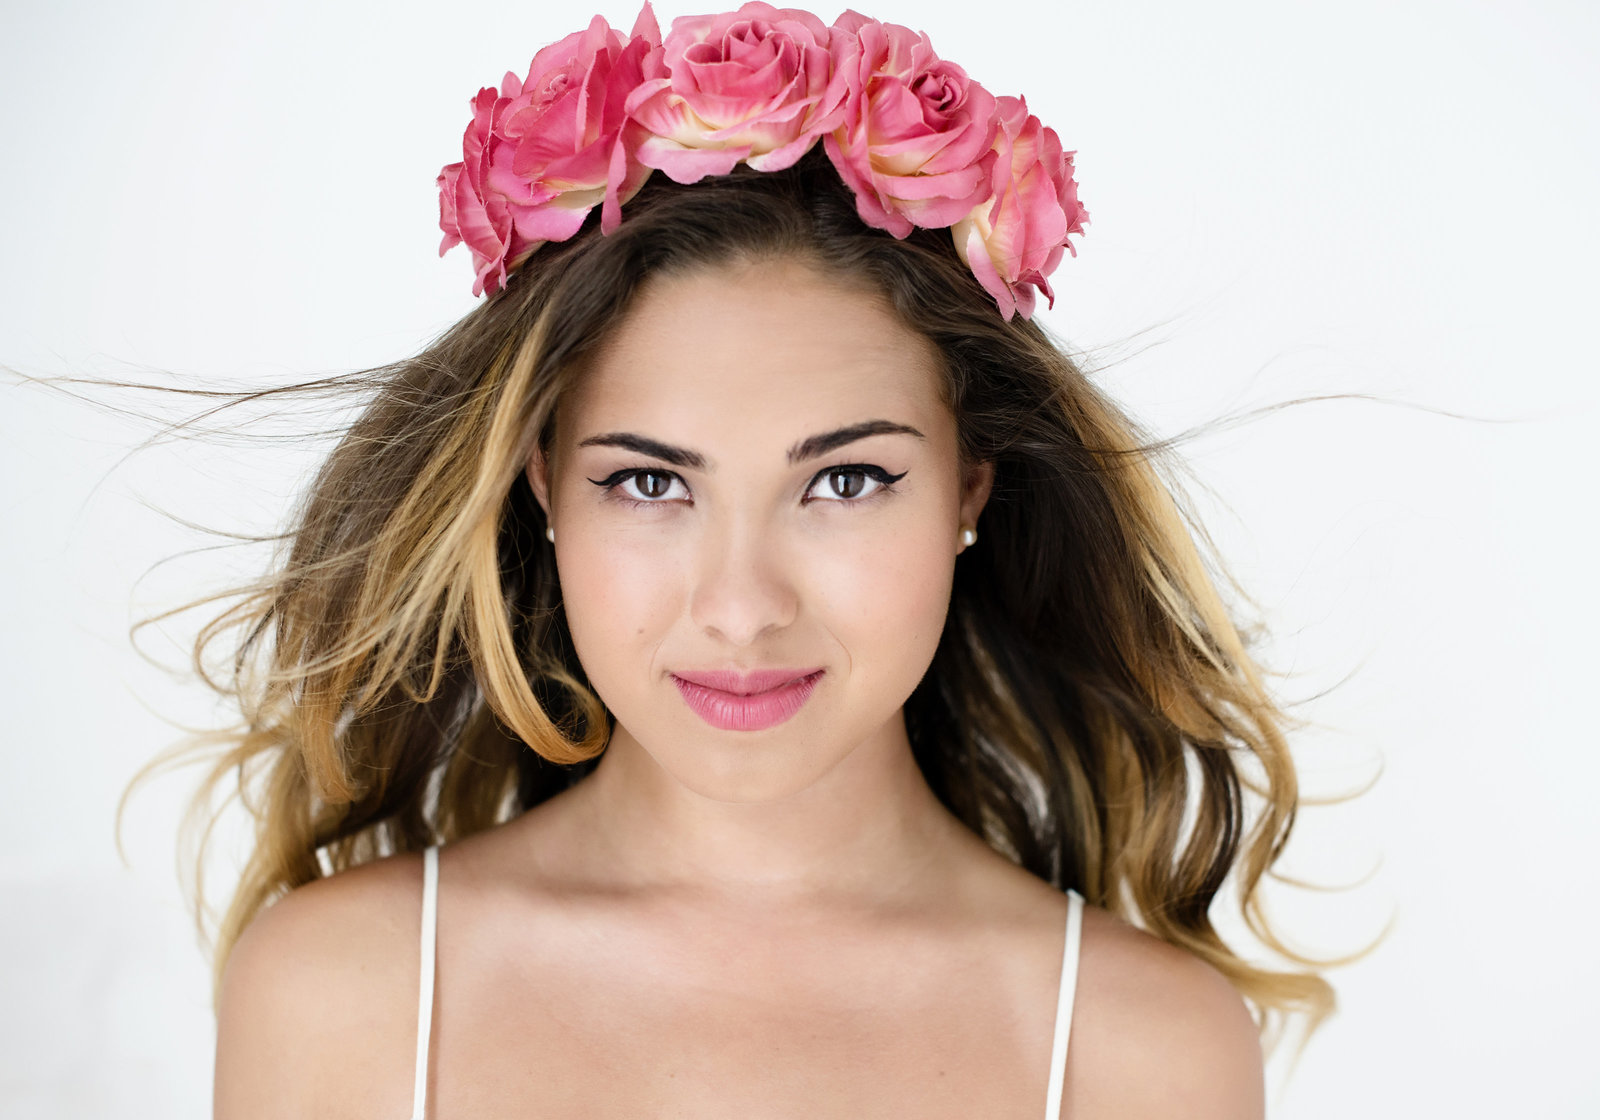 Toronto - branding Portrait  of young woman looking into camera with  flower  band on hair and eyes with eyeliner and  hair flowing in the air